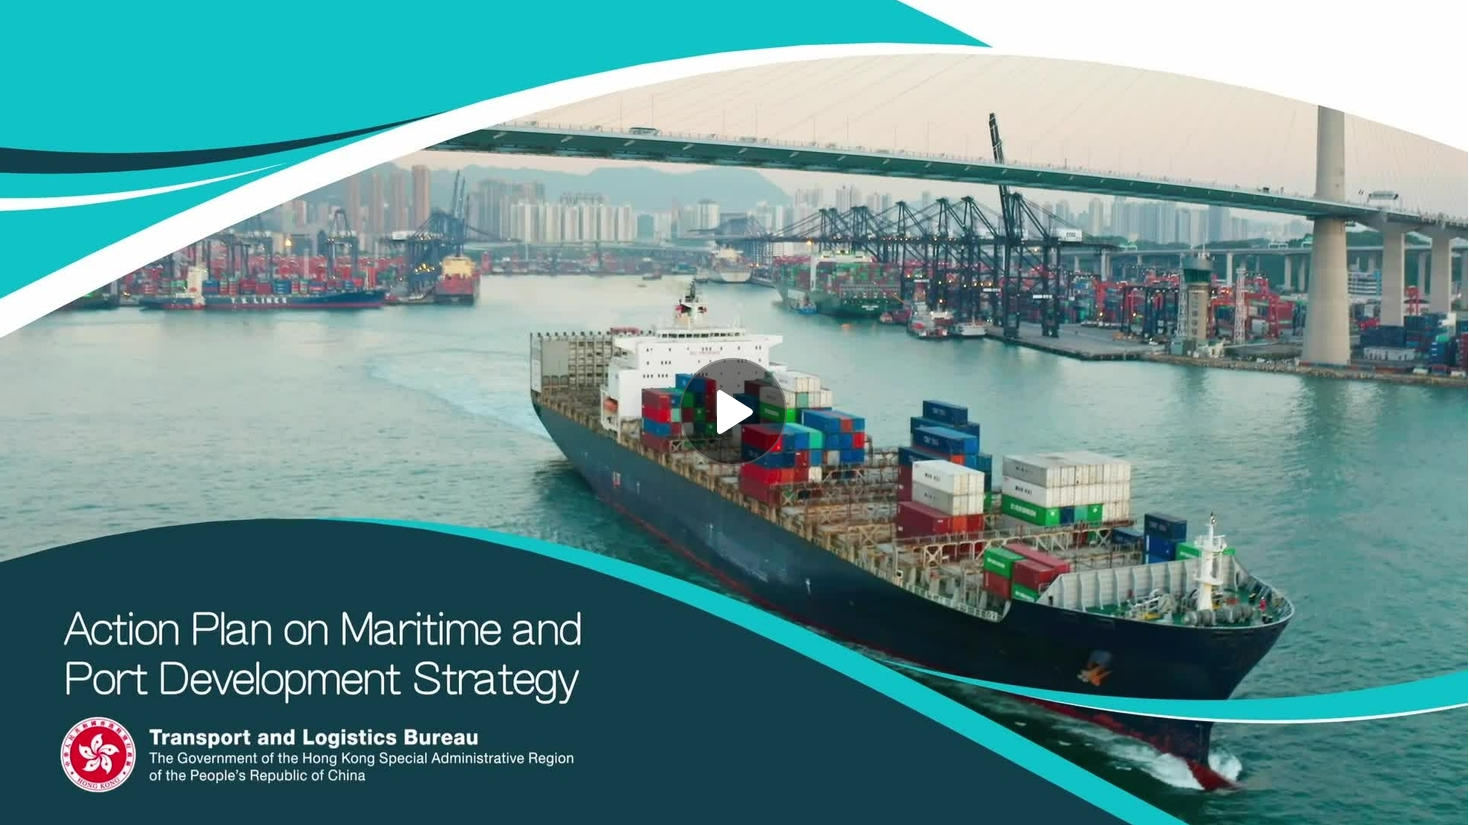 Promotional video on Action Plan on Maritime and Port Development Strategy